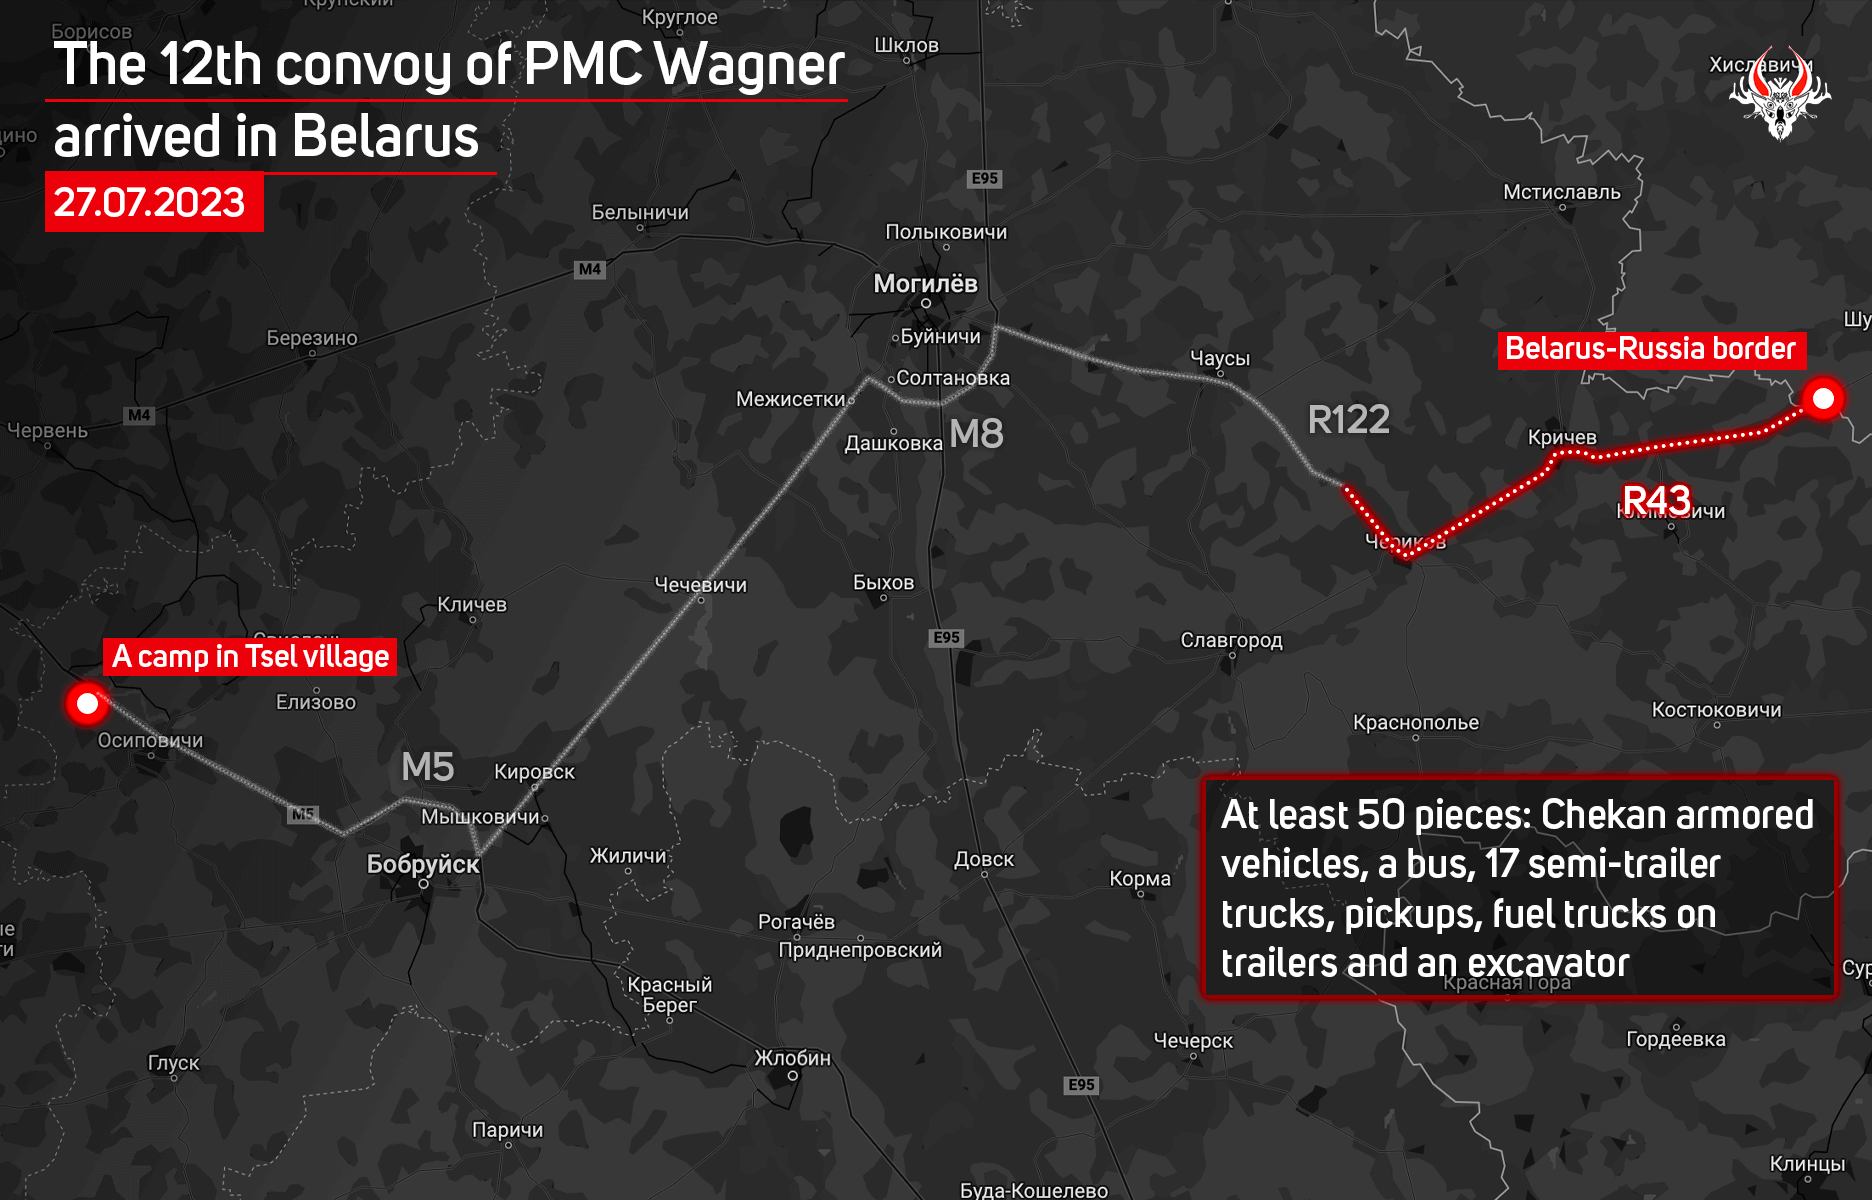 The 12th convoy of PMC Wagner arrived in Belarus